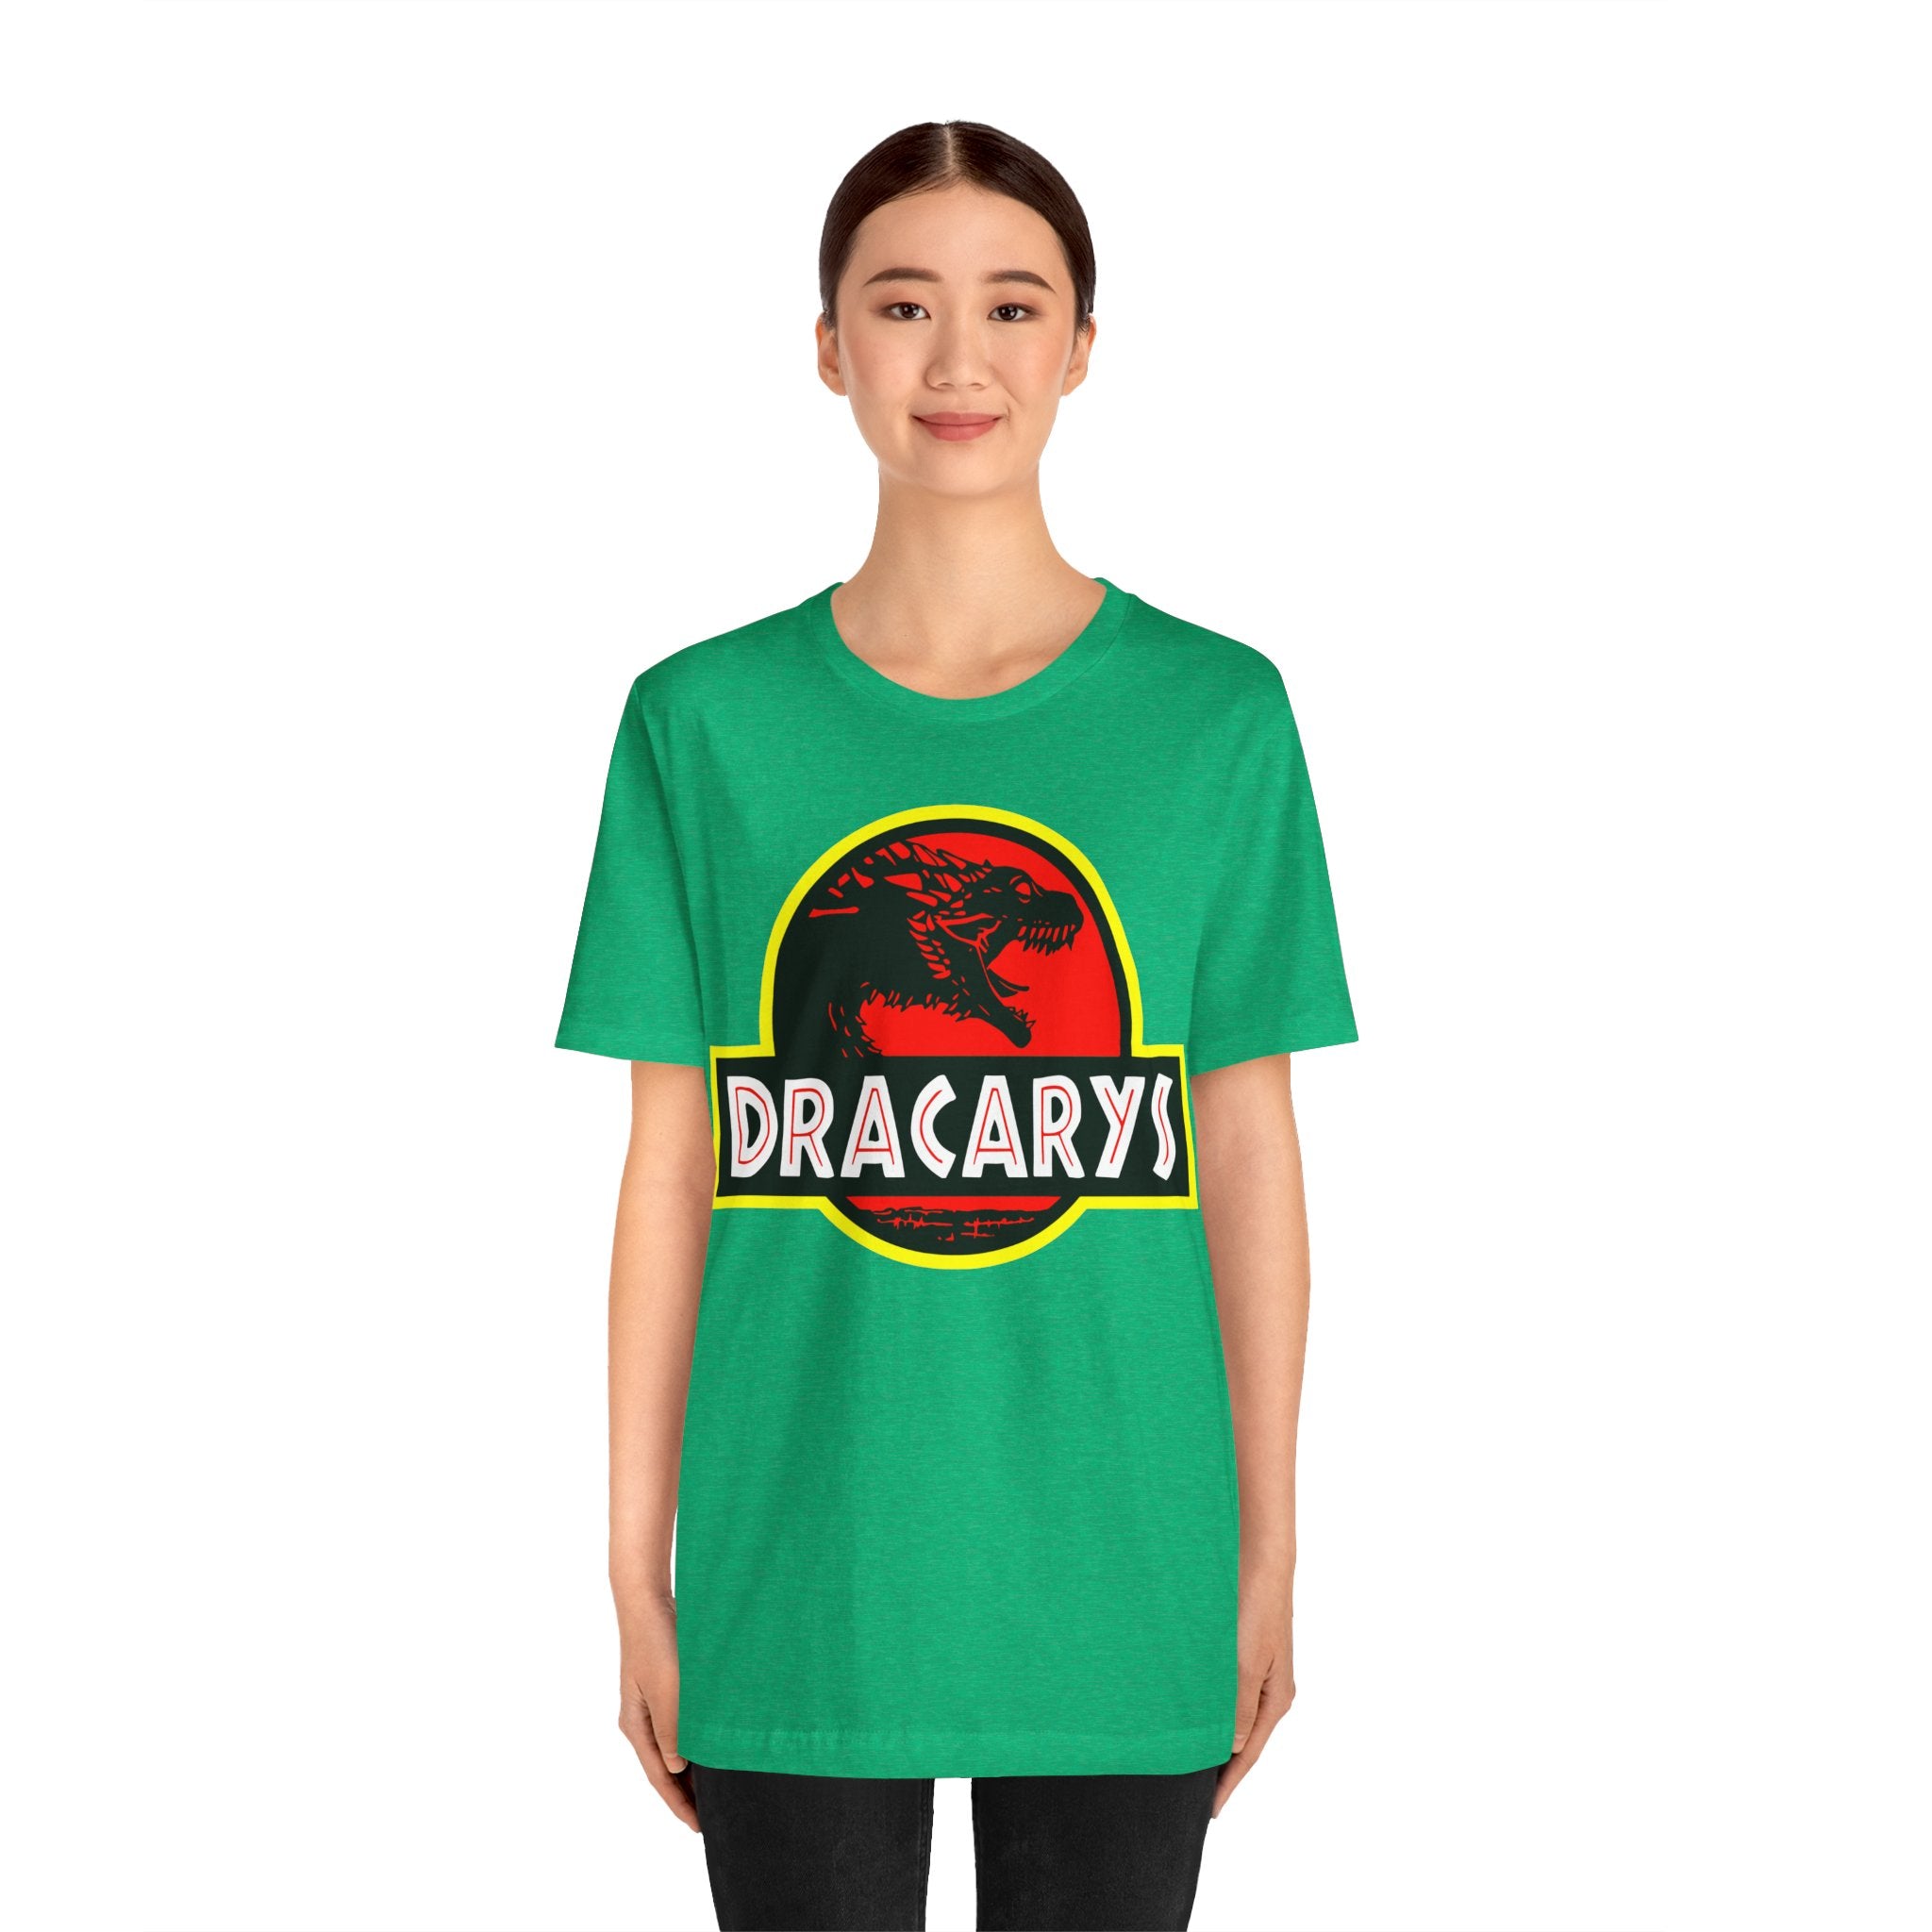 Young woman wearing a green Dracarys T-Shirt with a red dragon emblem design.